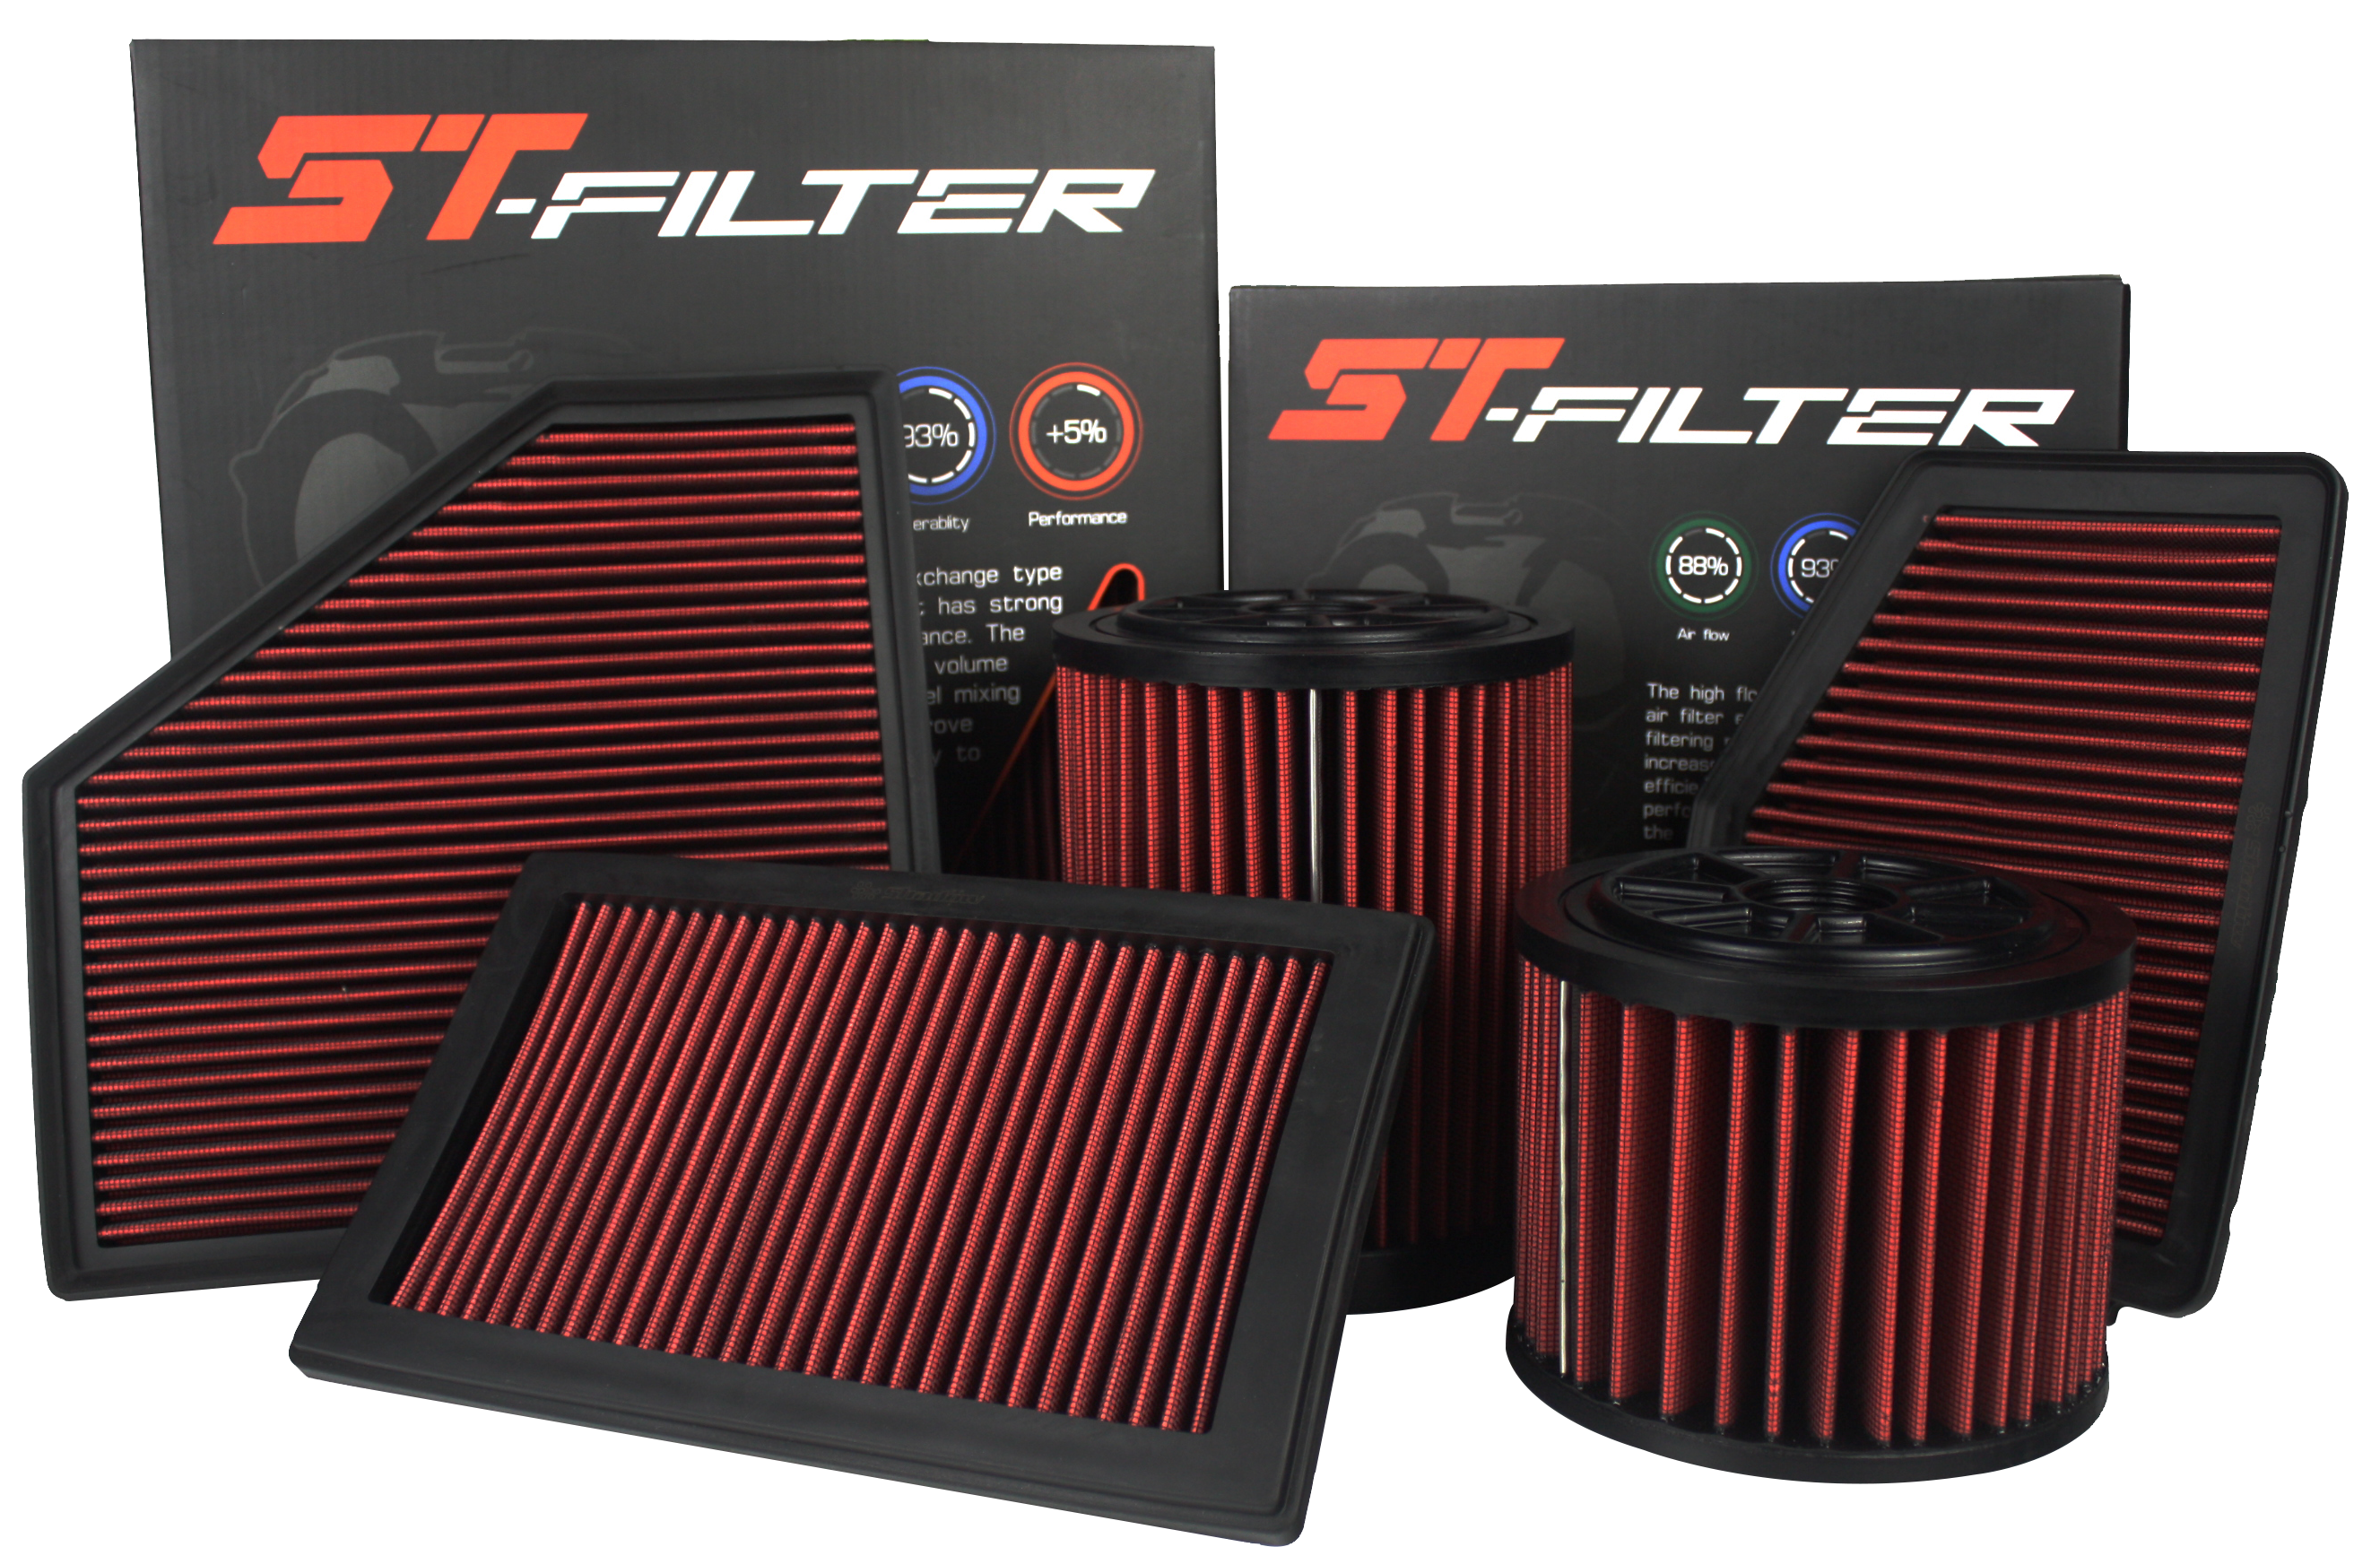 ST high flow air filter released by shadow